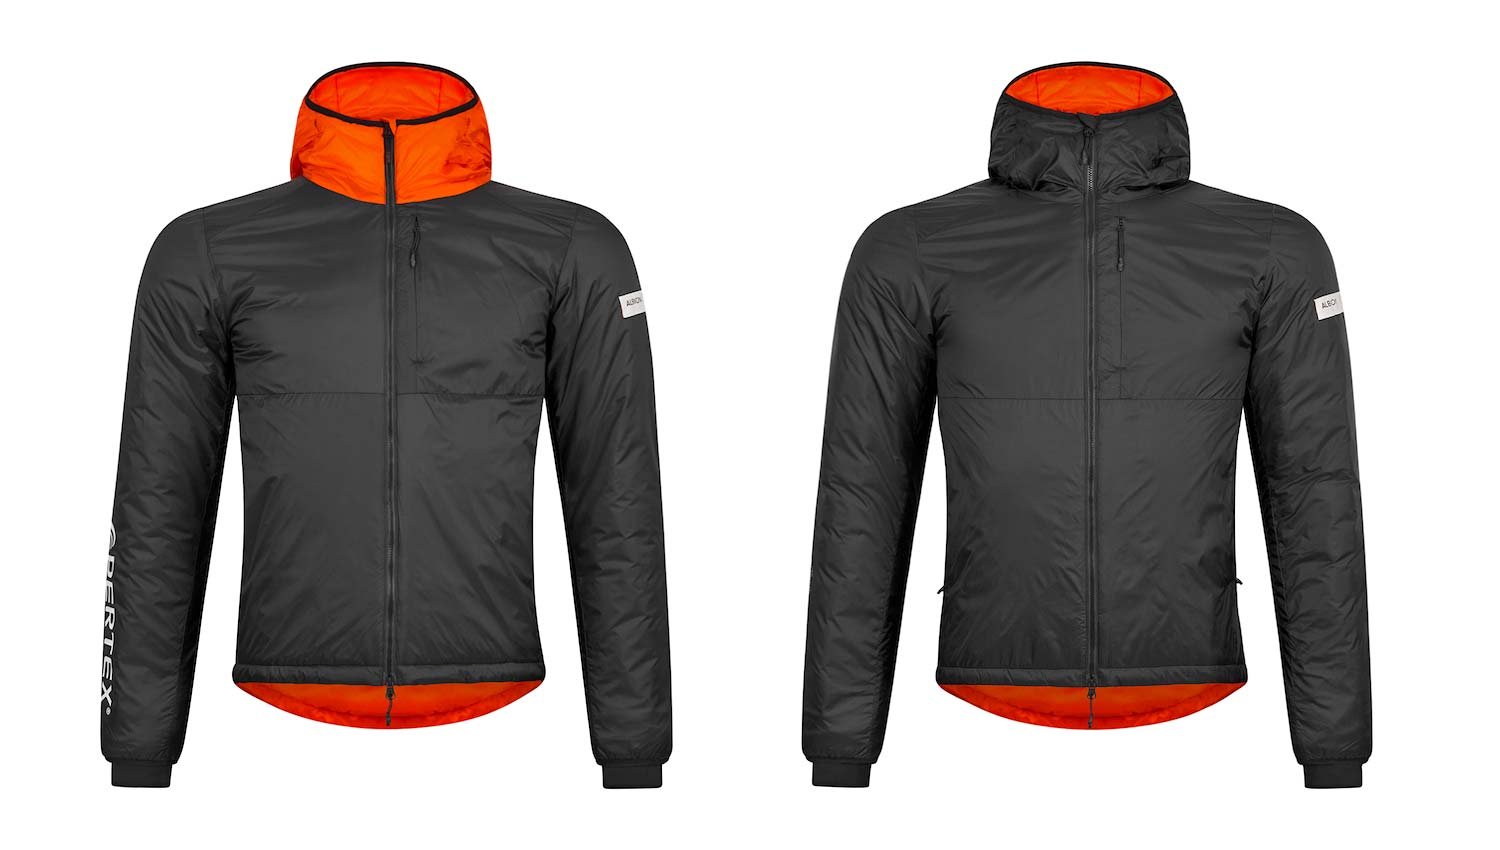 Albion Zoa Insulated Jacket, recycled Pertex fabrics, color options